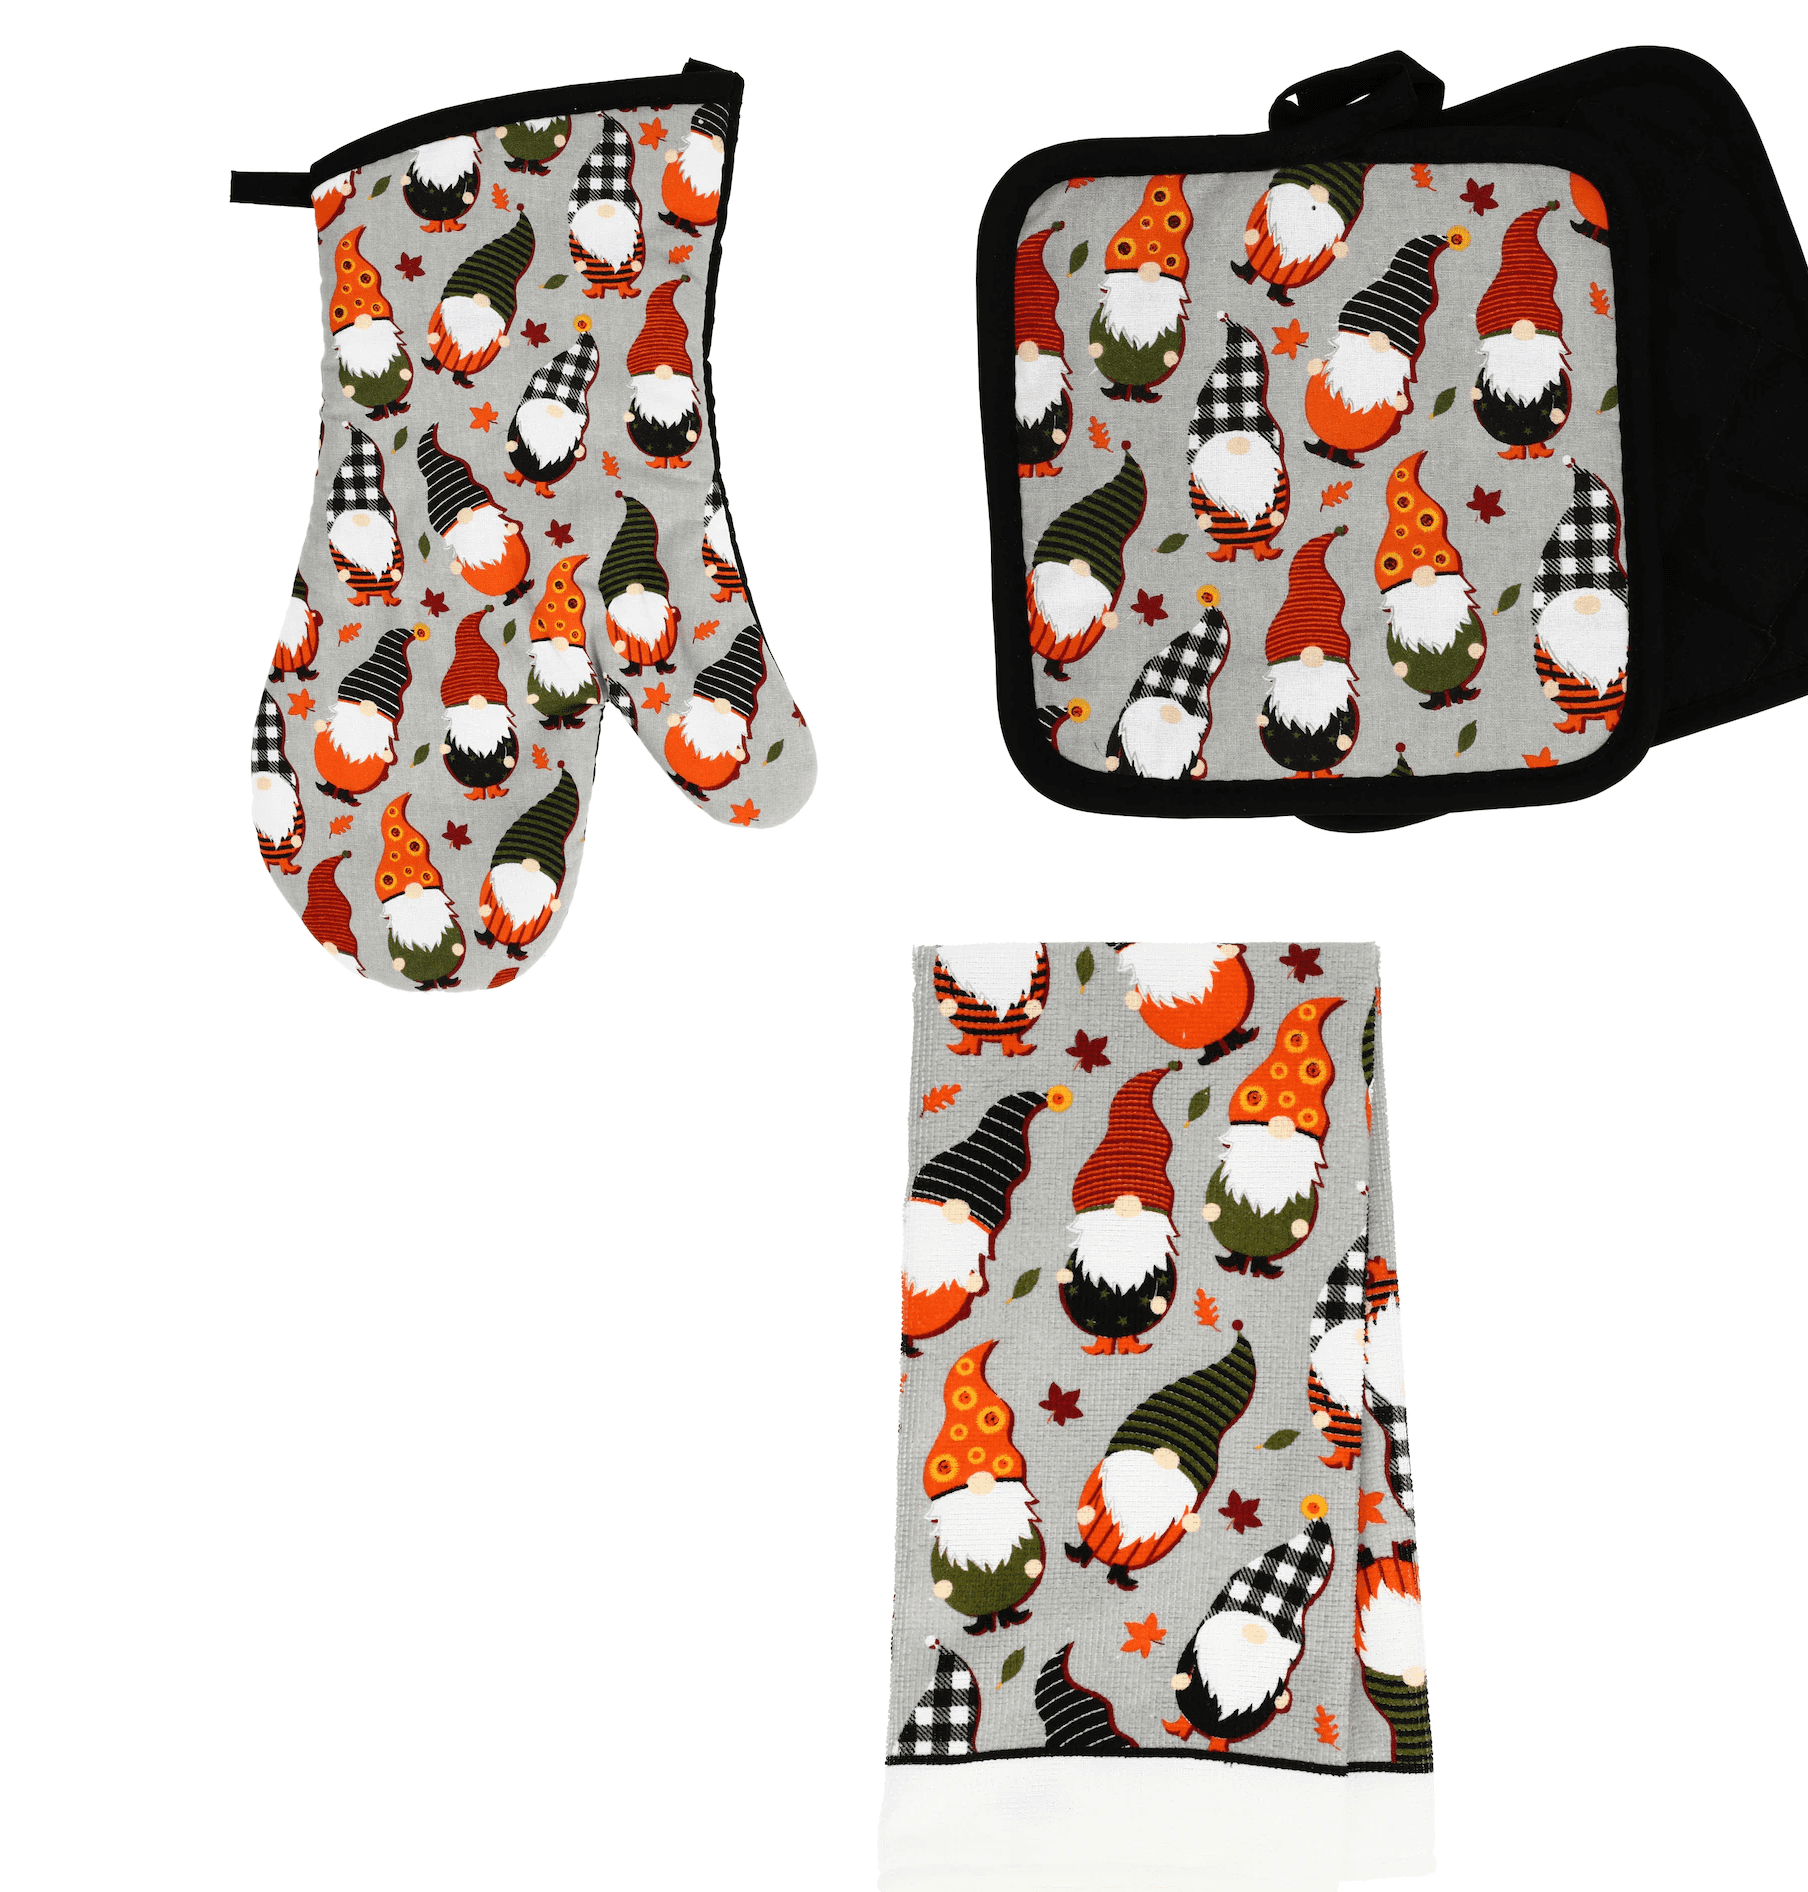 Whimsical Printed Gnome Halloween Oven Mitten, Pot Holders, and Towel Set